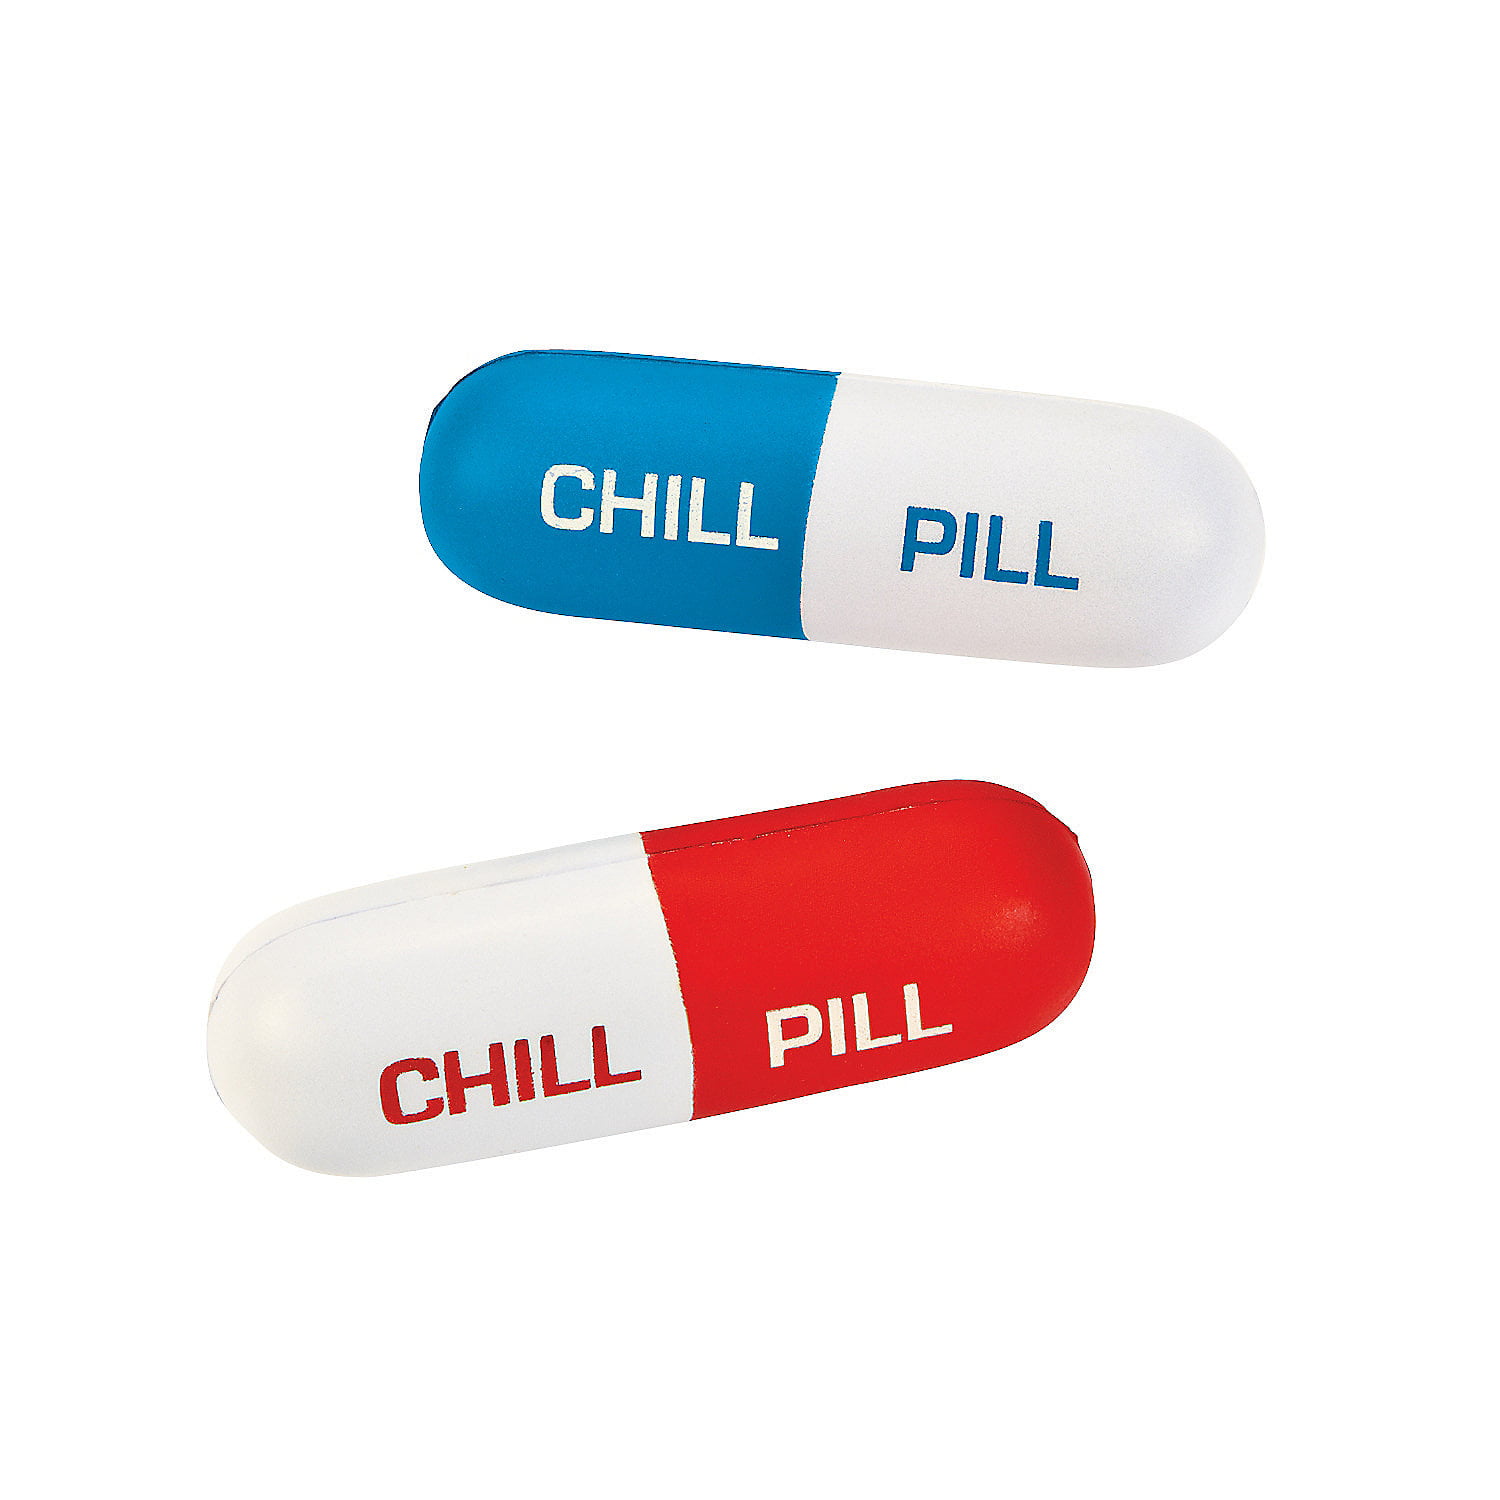 Buy Mo Chill Pill Stress Toys - Party Favors - 12 Pieces at Walmart.com. 